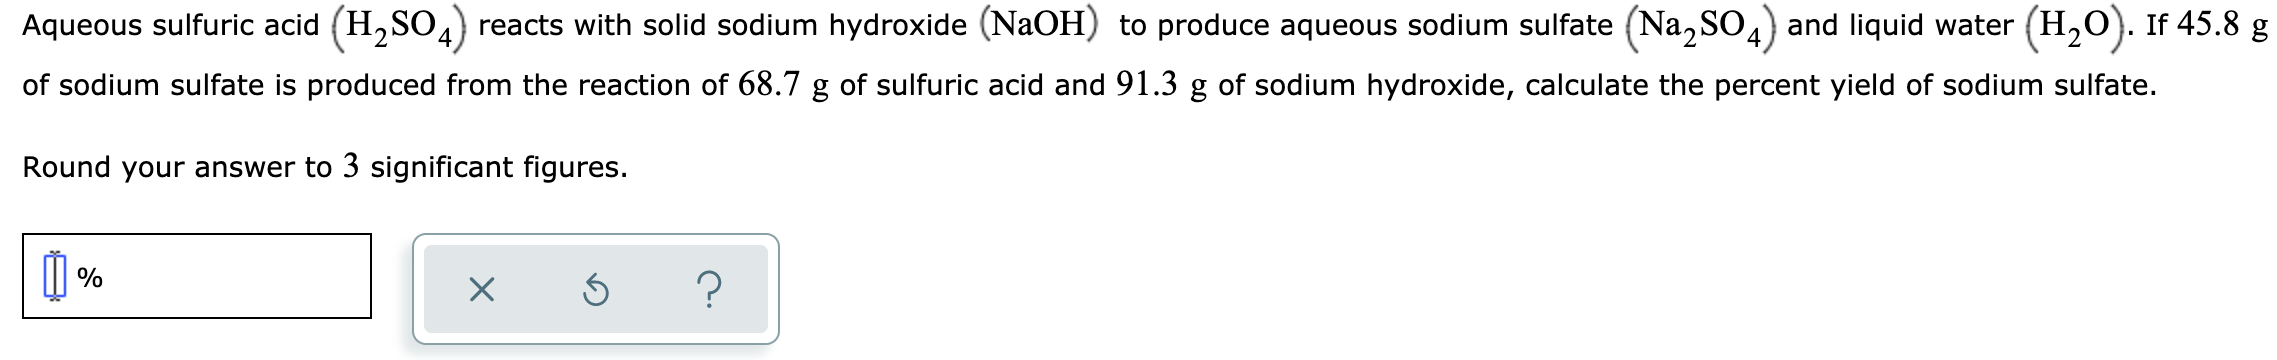 Aqueous sulfuric acid (H,SO,) reacts with solid sodium hydroxide (NaOH) to produce aqueous sodium sulfate (Na, SO,) and liquid water (H,0). If 45.8 g
of sodium sulfate is produced from the reaction of 68.7 g of sulfuric acid and 91.3 g of sodium hydroxide, calculate the percent yield of sodium sulfate.
Round your answer to 3 significant figures.
